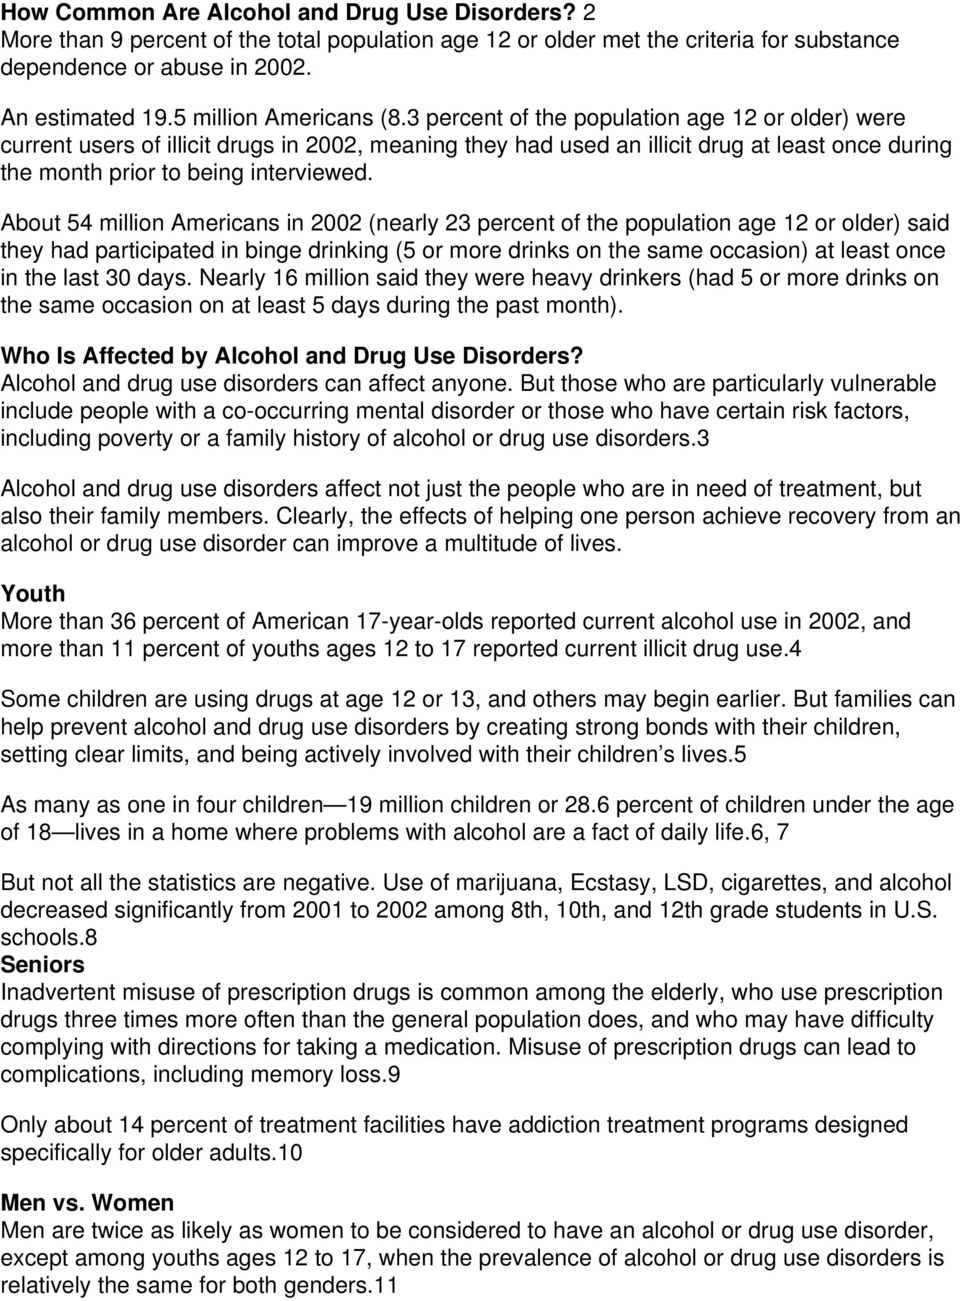 3 percent of the population age 12 or older) were current users of illicit drugs in 2002, meaning they had used an illicit drug at least once during the month prior to being interviewed.